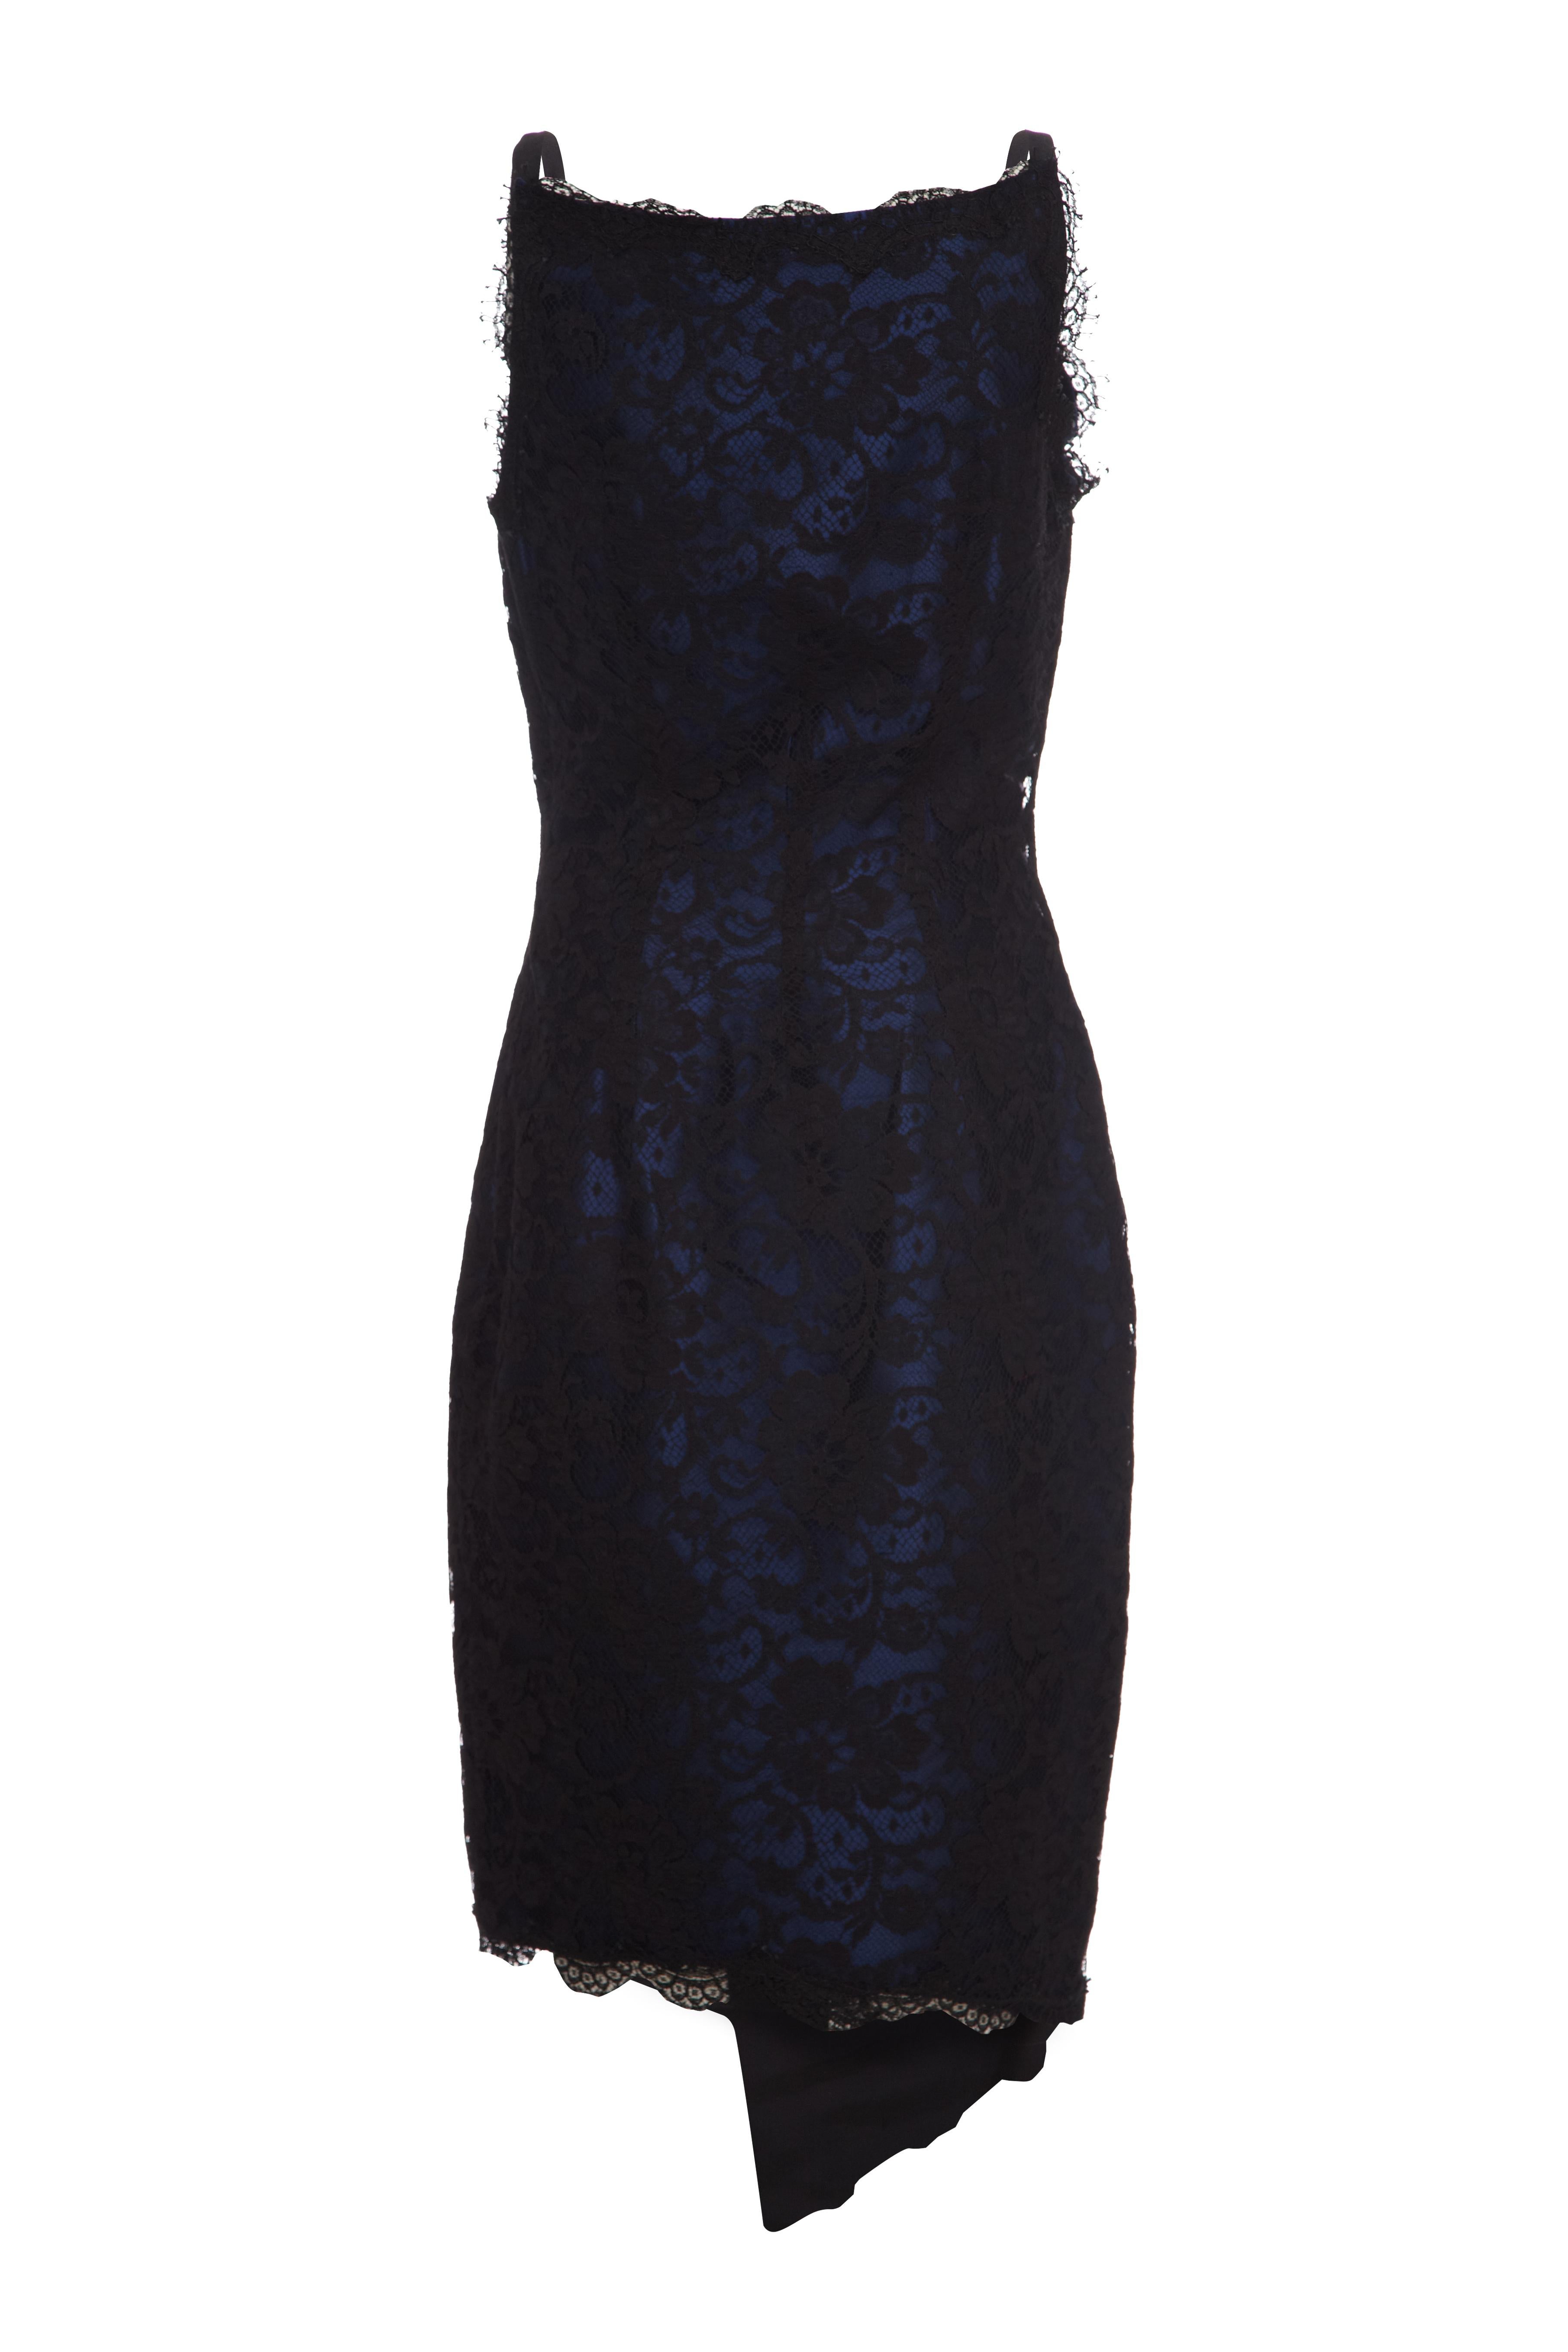 This desirable 1990s black lace cocktail dress with blue silk underlay is couture by British designer David Fielden and exudes quality. A favourite of figurative icons such as Elizabeth Taylor, Julia Roberts, Bette Midler, Bianca Jagger and Kate